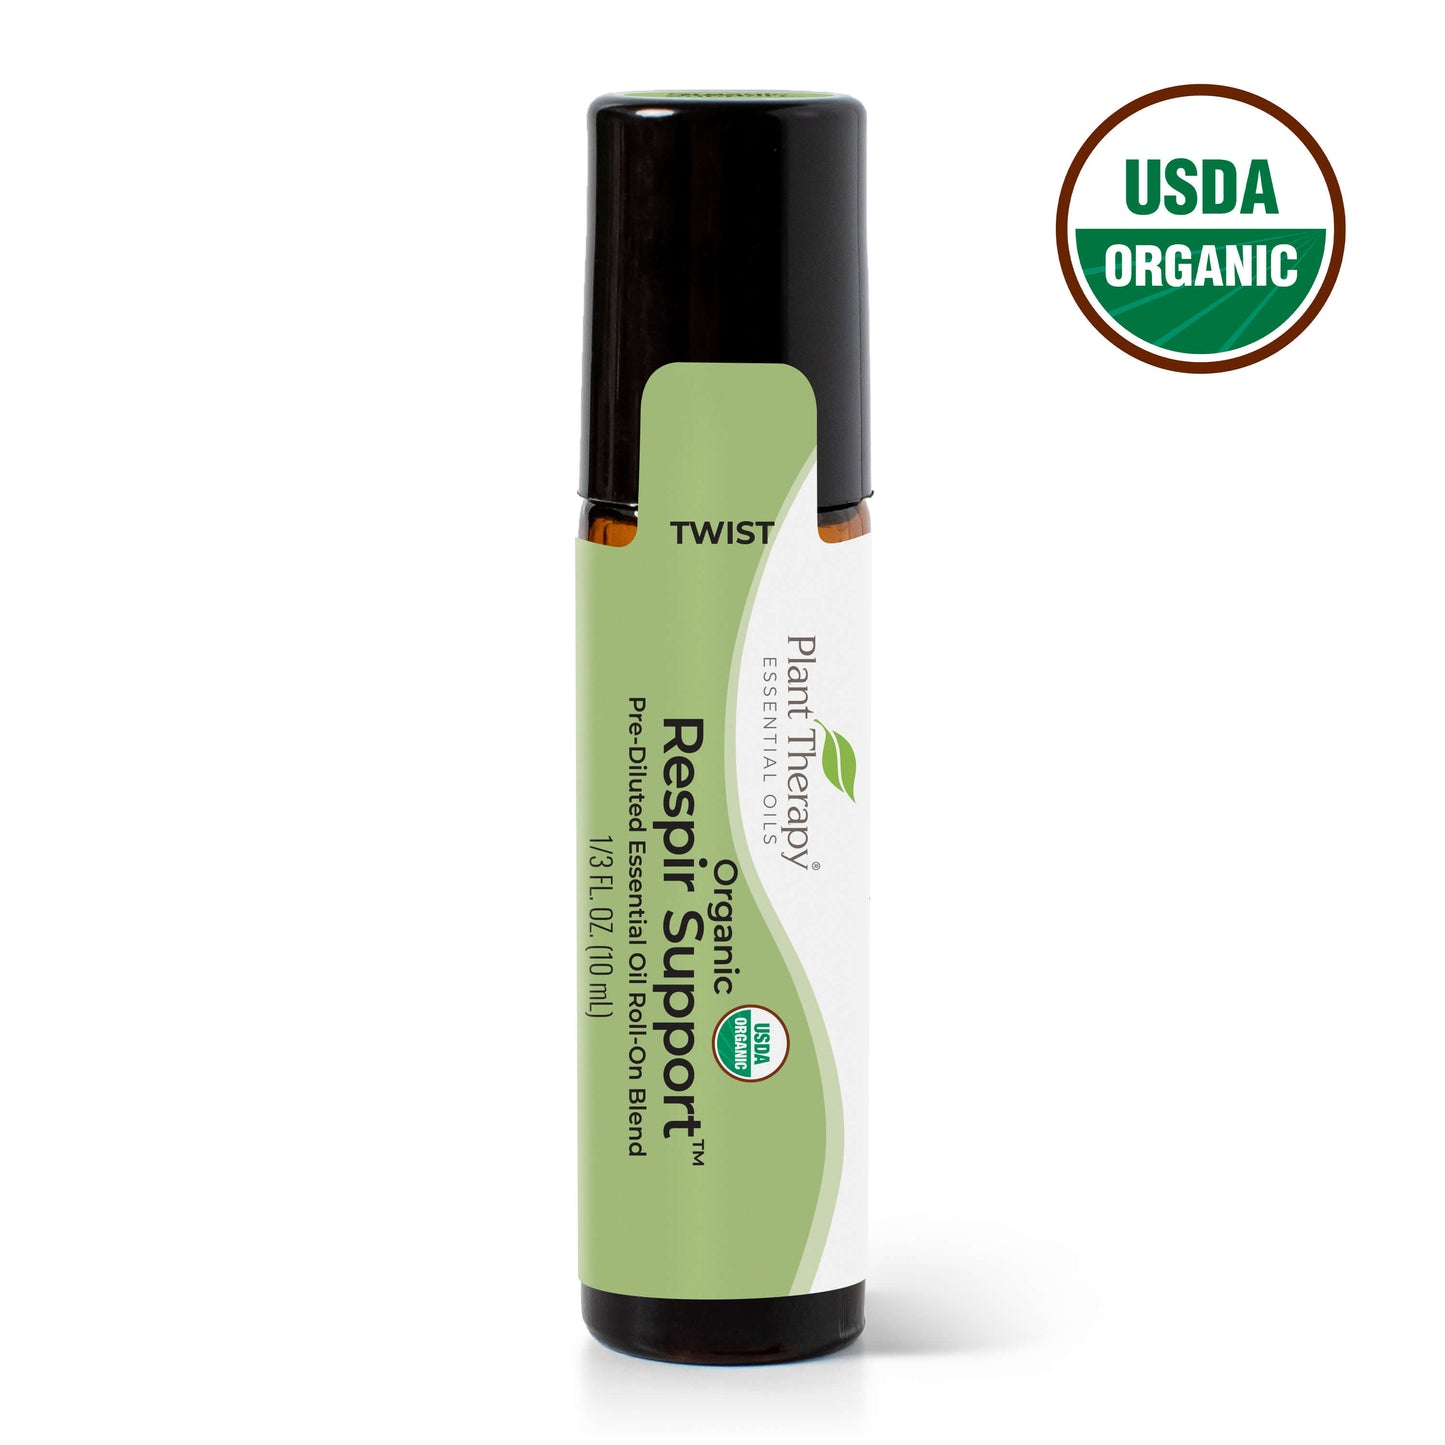 Organic Respir Support® Essential Oil Blend Pre-Diluted Roll-On